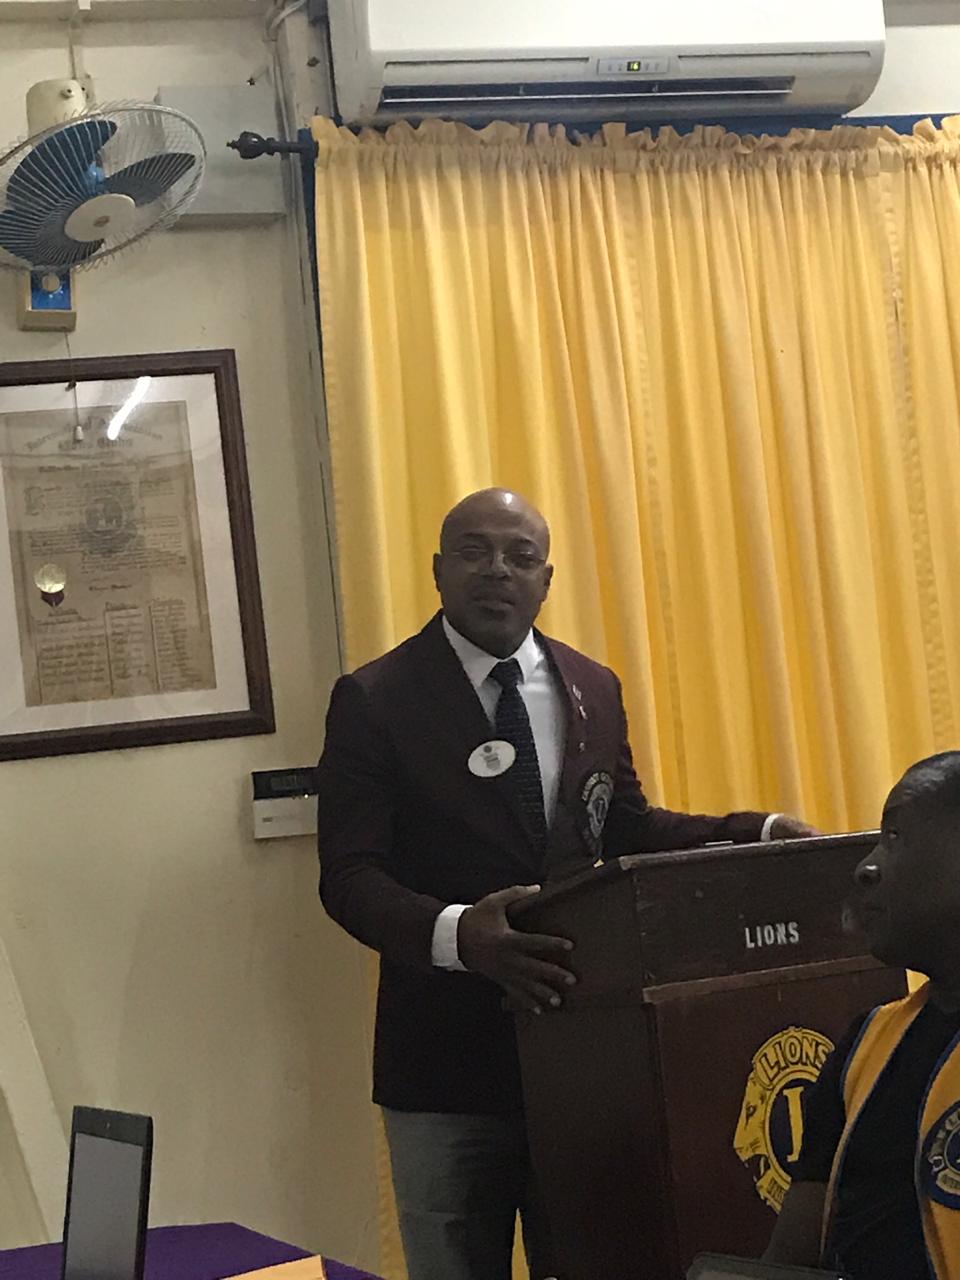 Lions District Governor pays Official Visit - Antigua News Room